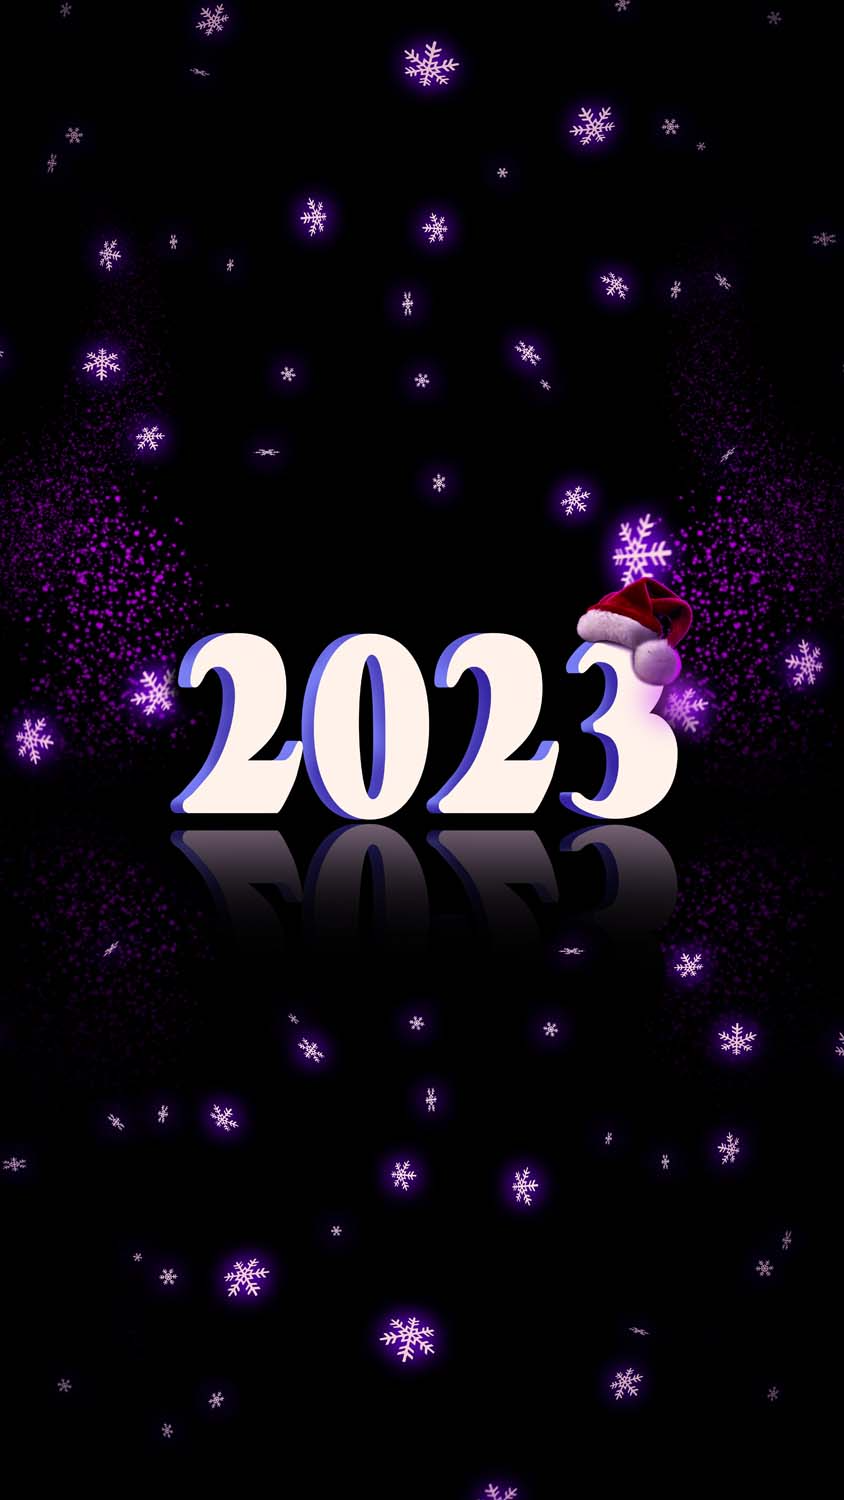 2023 New Year Celebration IPhone Wallpaper HD  IPhone Wallpapers